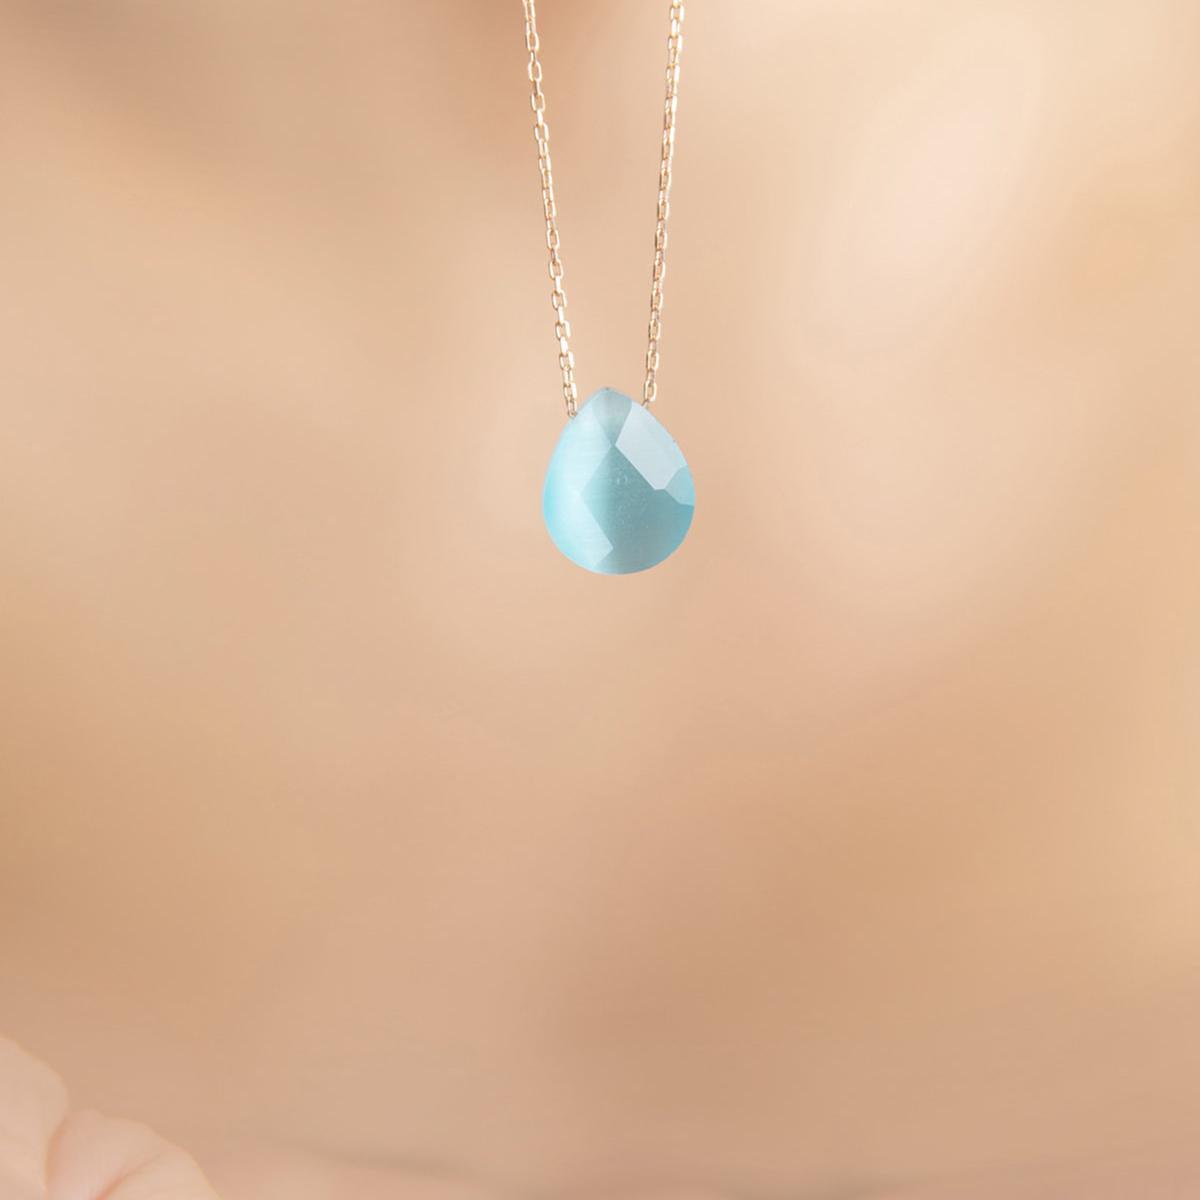 Blue Gemstone Necklace • Blue Opal Necklace • Blue Necklace Pendant - Trending Silver Gifts